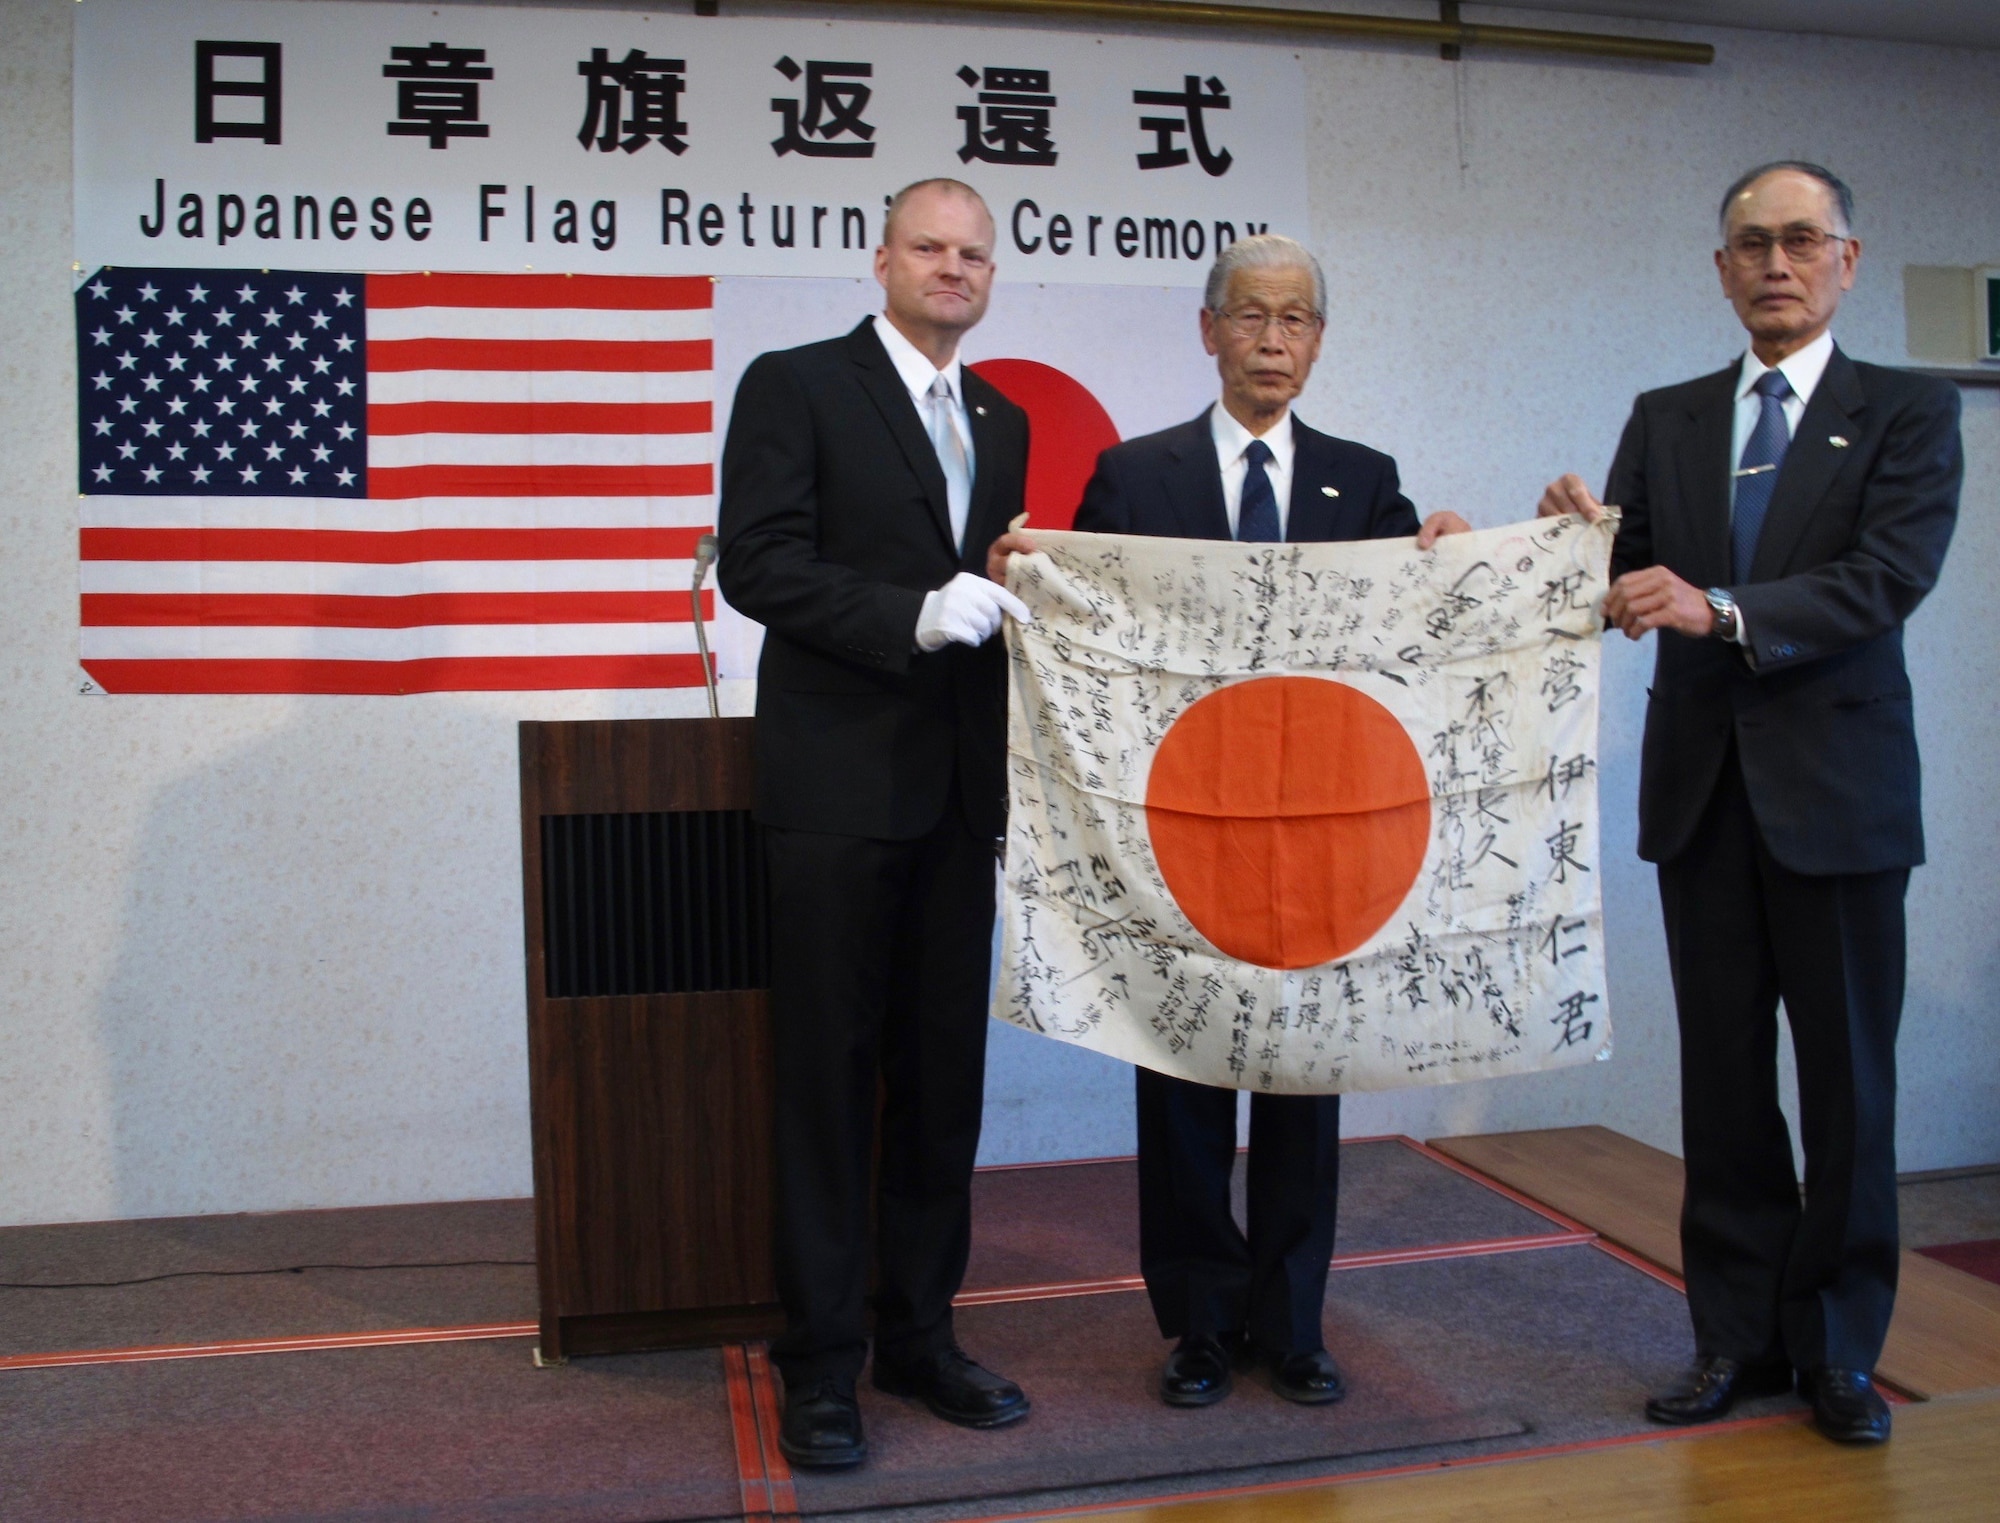 U.S. Air Force Senior Master Sgt. William Armstrong, 8th Logistics Readiness Squadron deployment and distribution flight superintendent, (left), hands a Japanese flag to Michio Miki (middle) and Hideo Ito, Masashi Ito’s nephews, during a flag return ceremony in Takasaki, Japan, Feb. 14, 2019. Armstrong’s grandfather acquired Miki and Ito’s uncle’s flag during World War II. (Courtesy photo, Obon Society)